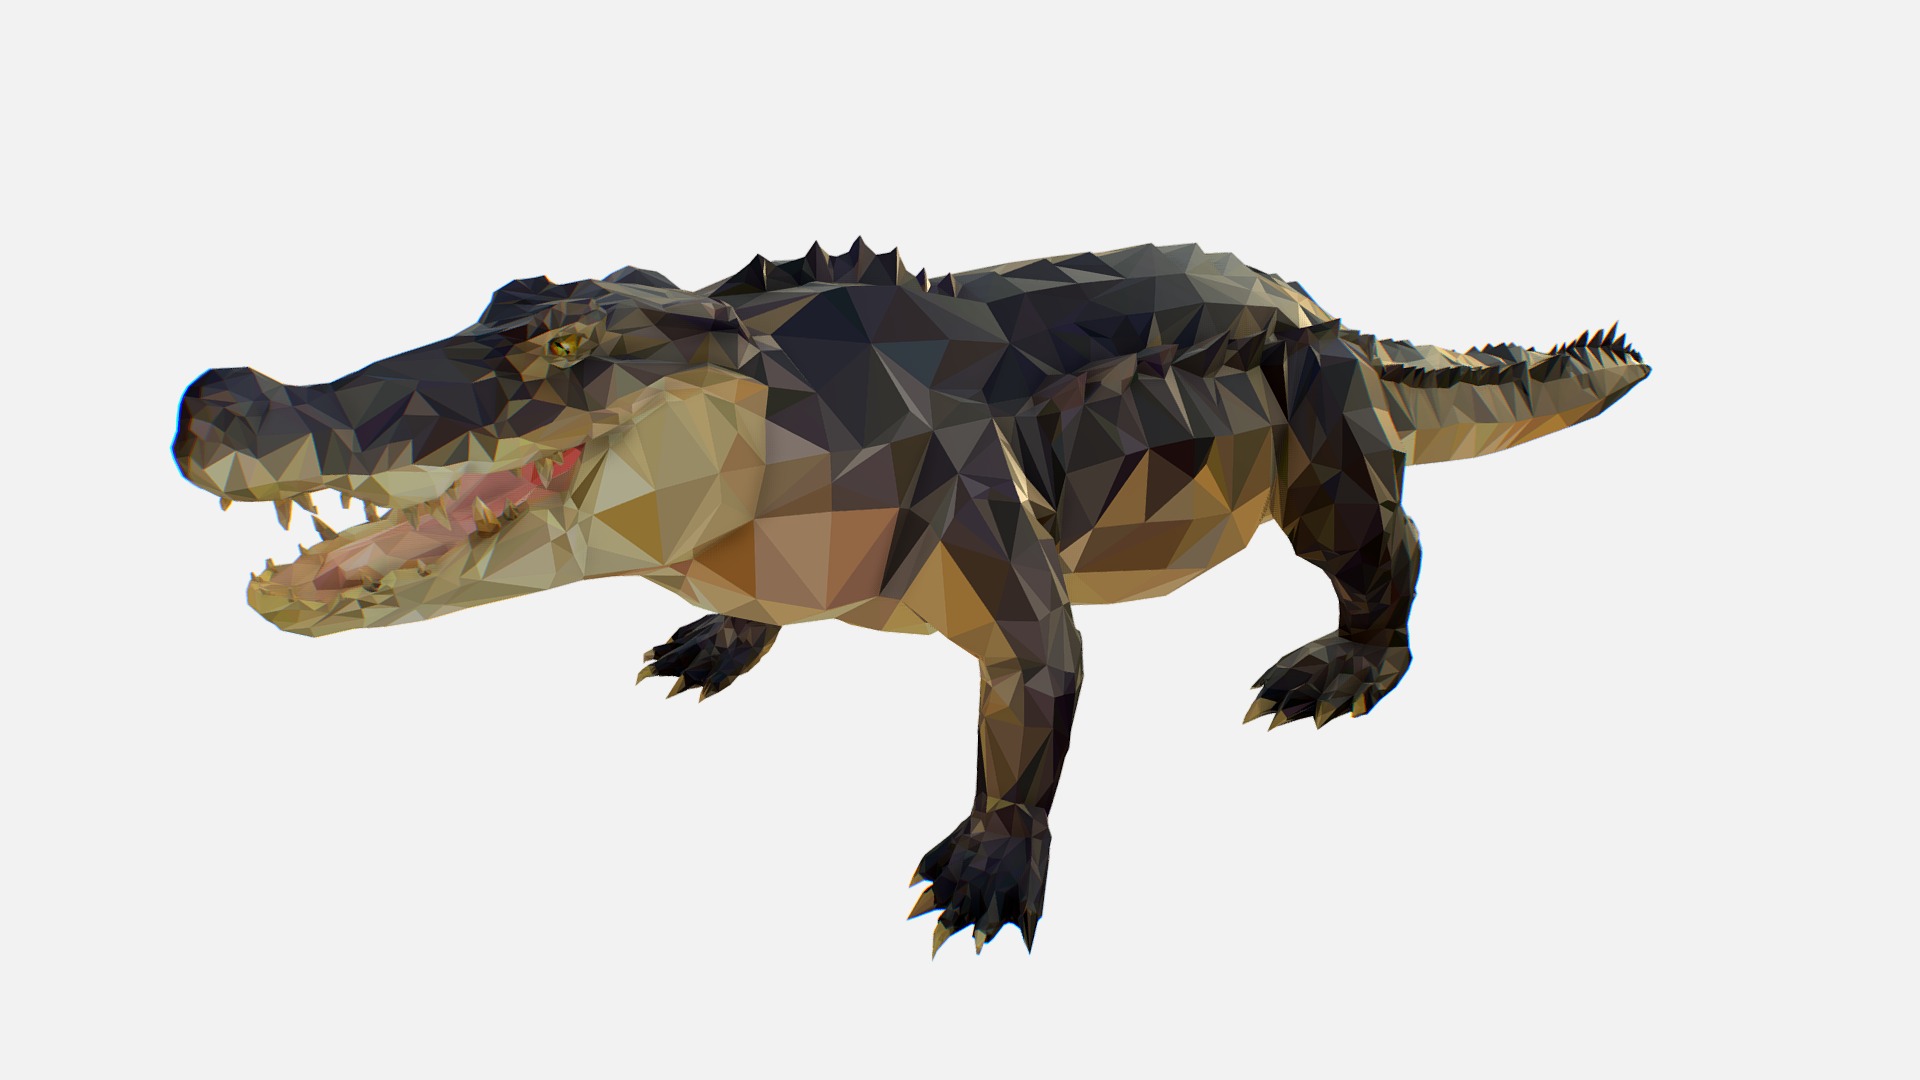 3D model Low Poly Art Crocodile Reptile - This is a 3D model of the Low Poly Art Crocodile Reptile. The 3D model is about a colorful lizard with a white background.